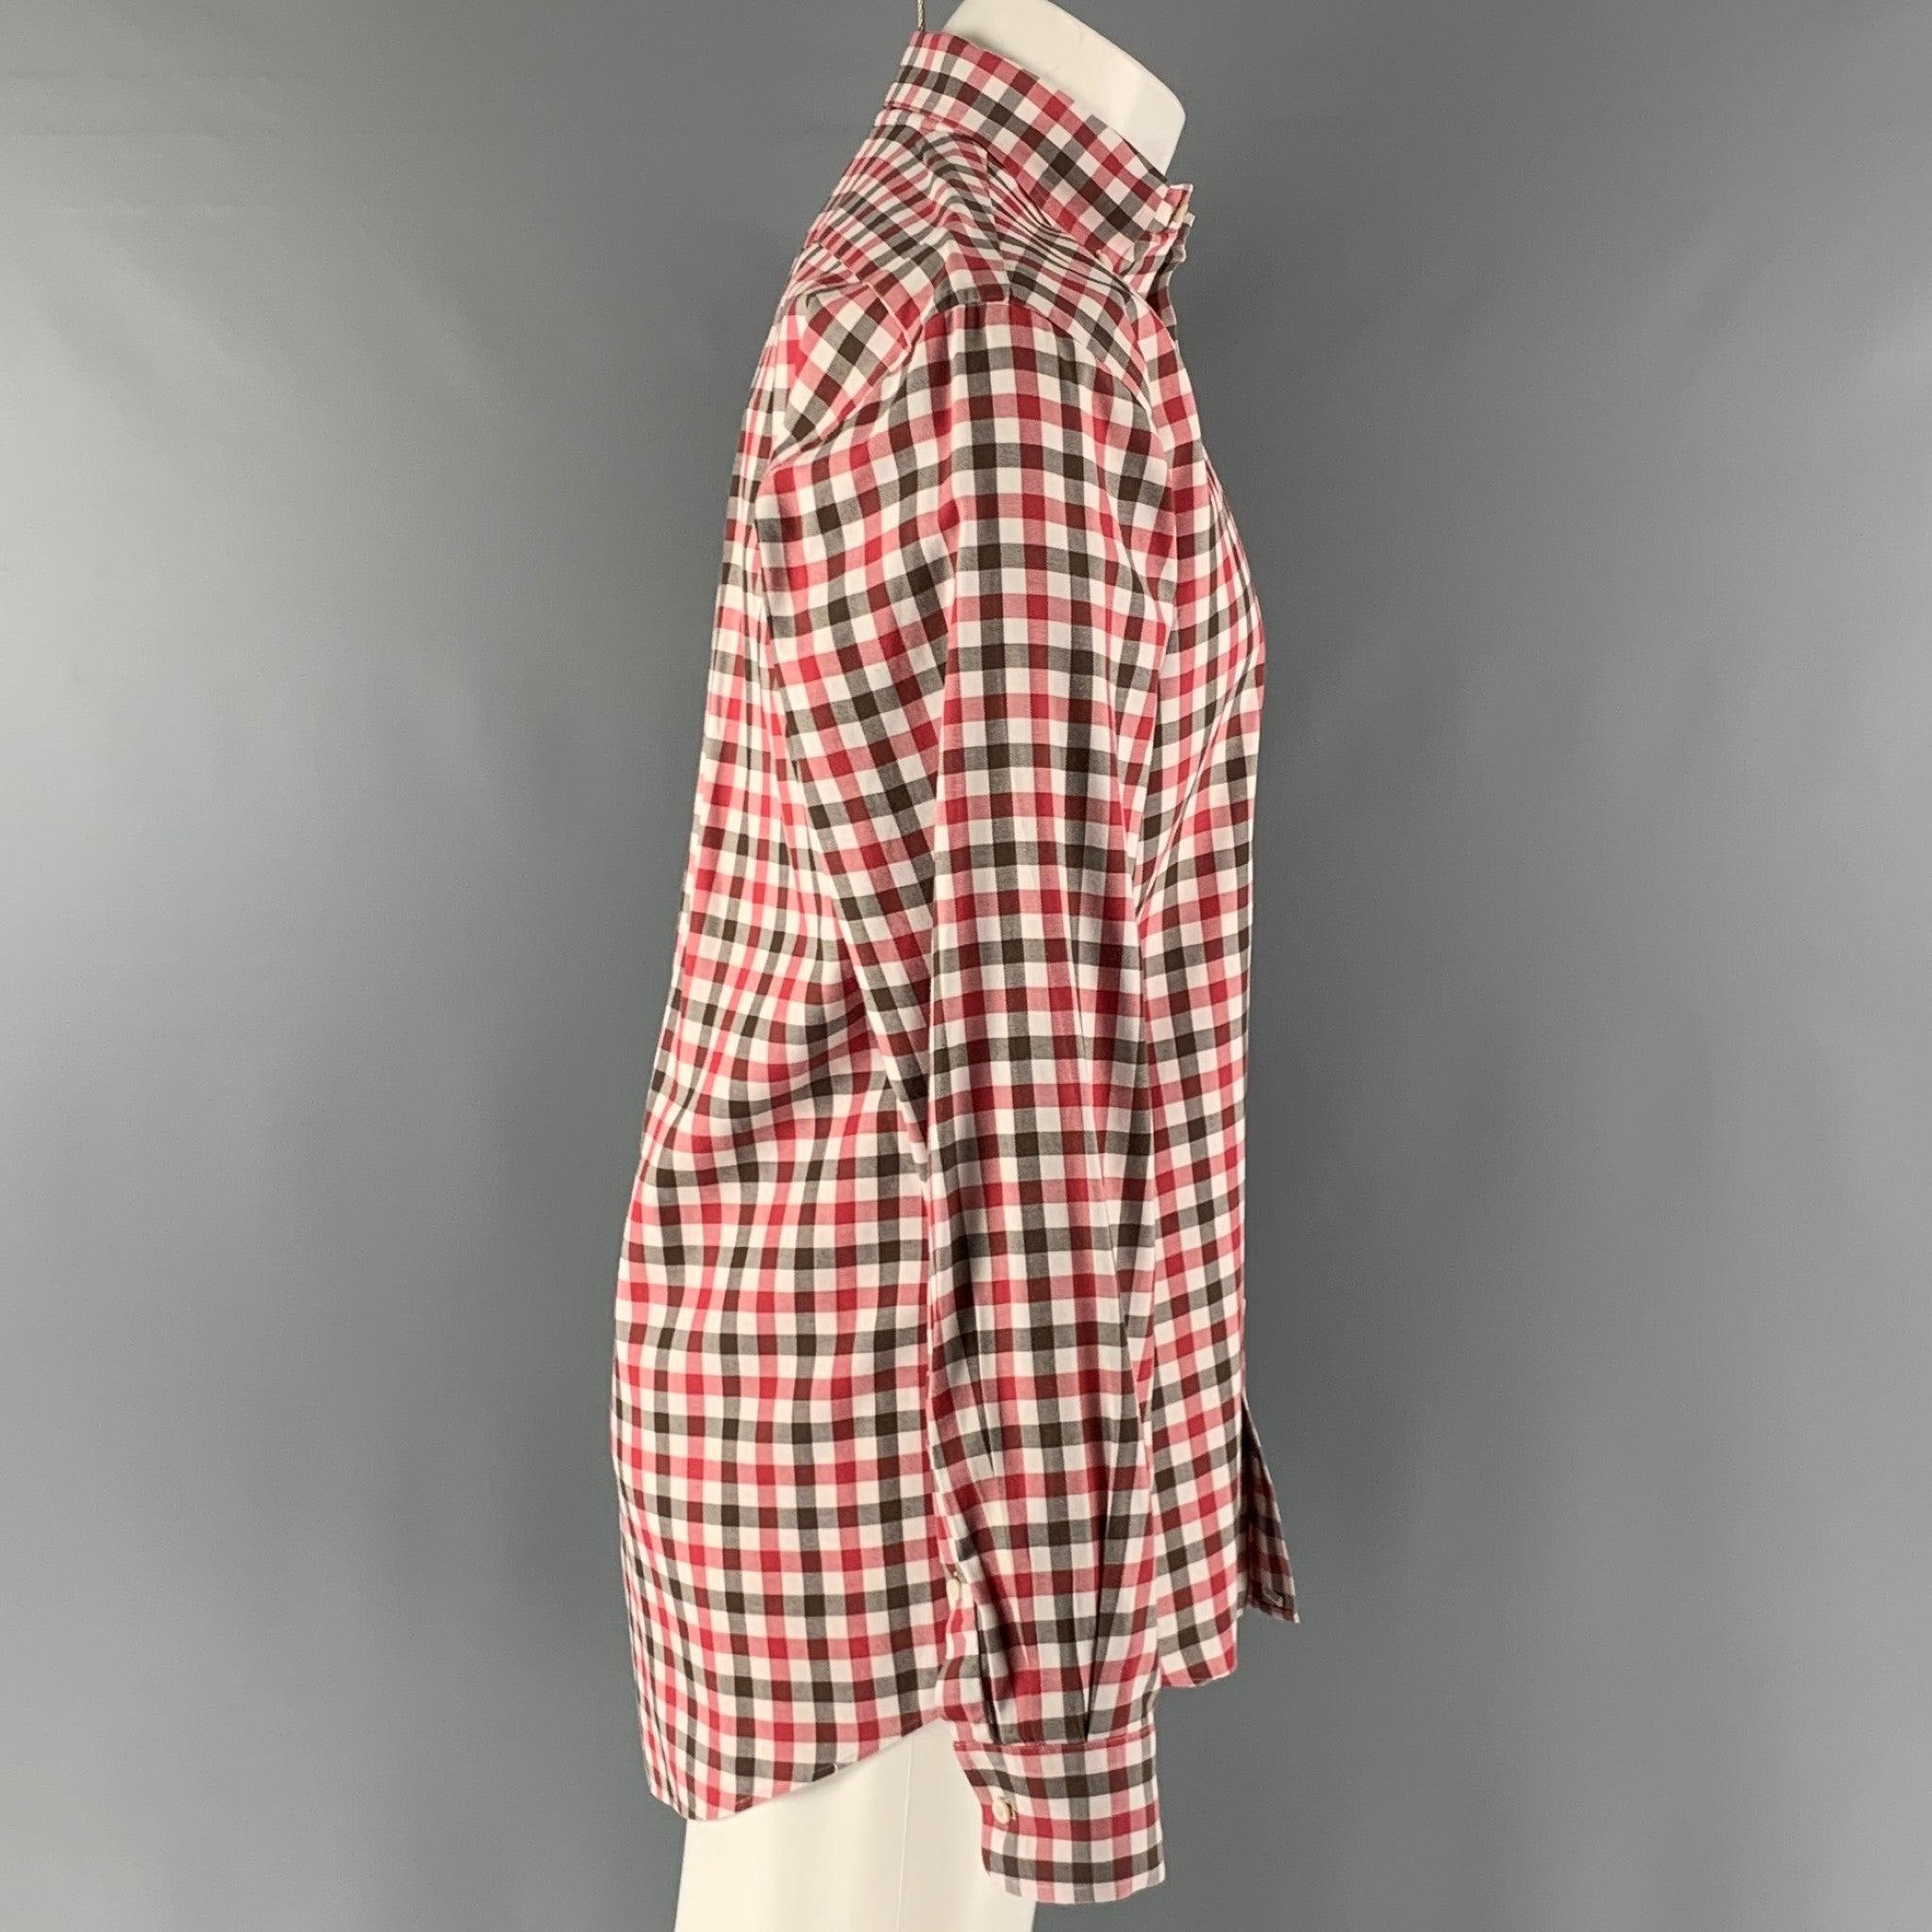 BERGDORF GOODMAN Tailored Fit long sleeve shirt comes in brown, red and white checkered cotton printed woven material featuring a button down collar, button up closure. Made in Italy.Excellent Pre-Owned Condition. 

Marked:   M 

Measurements: 
